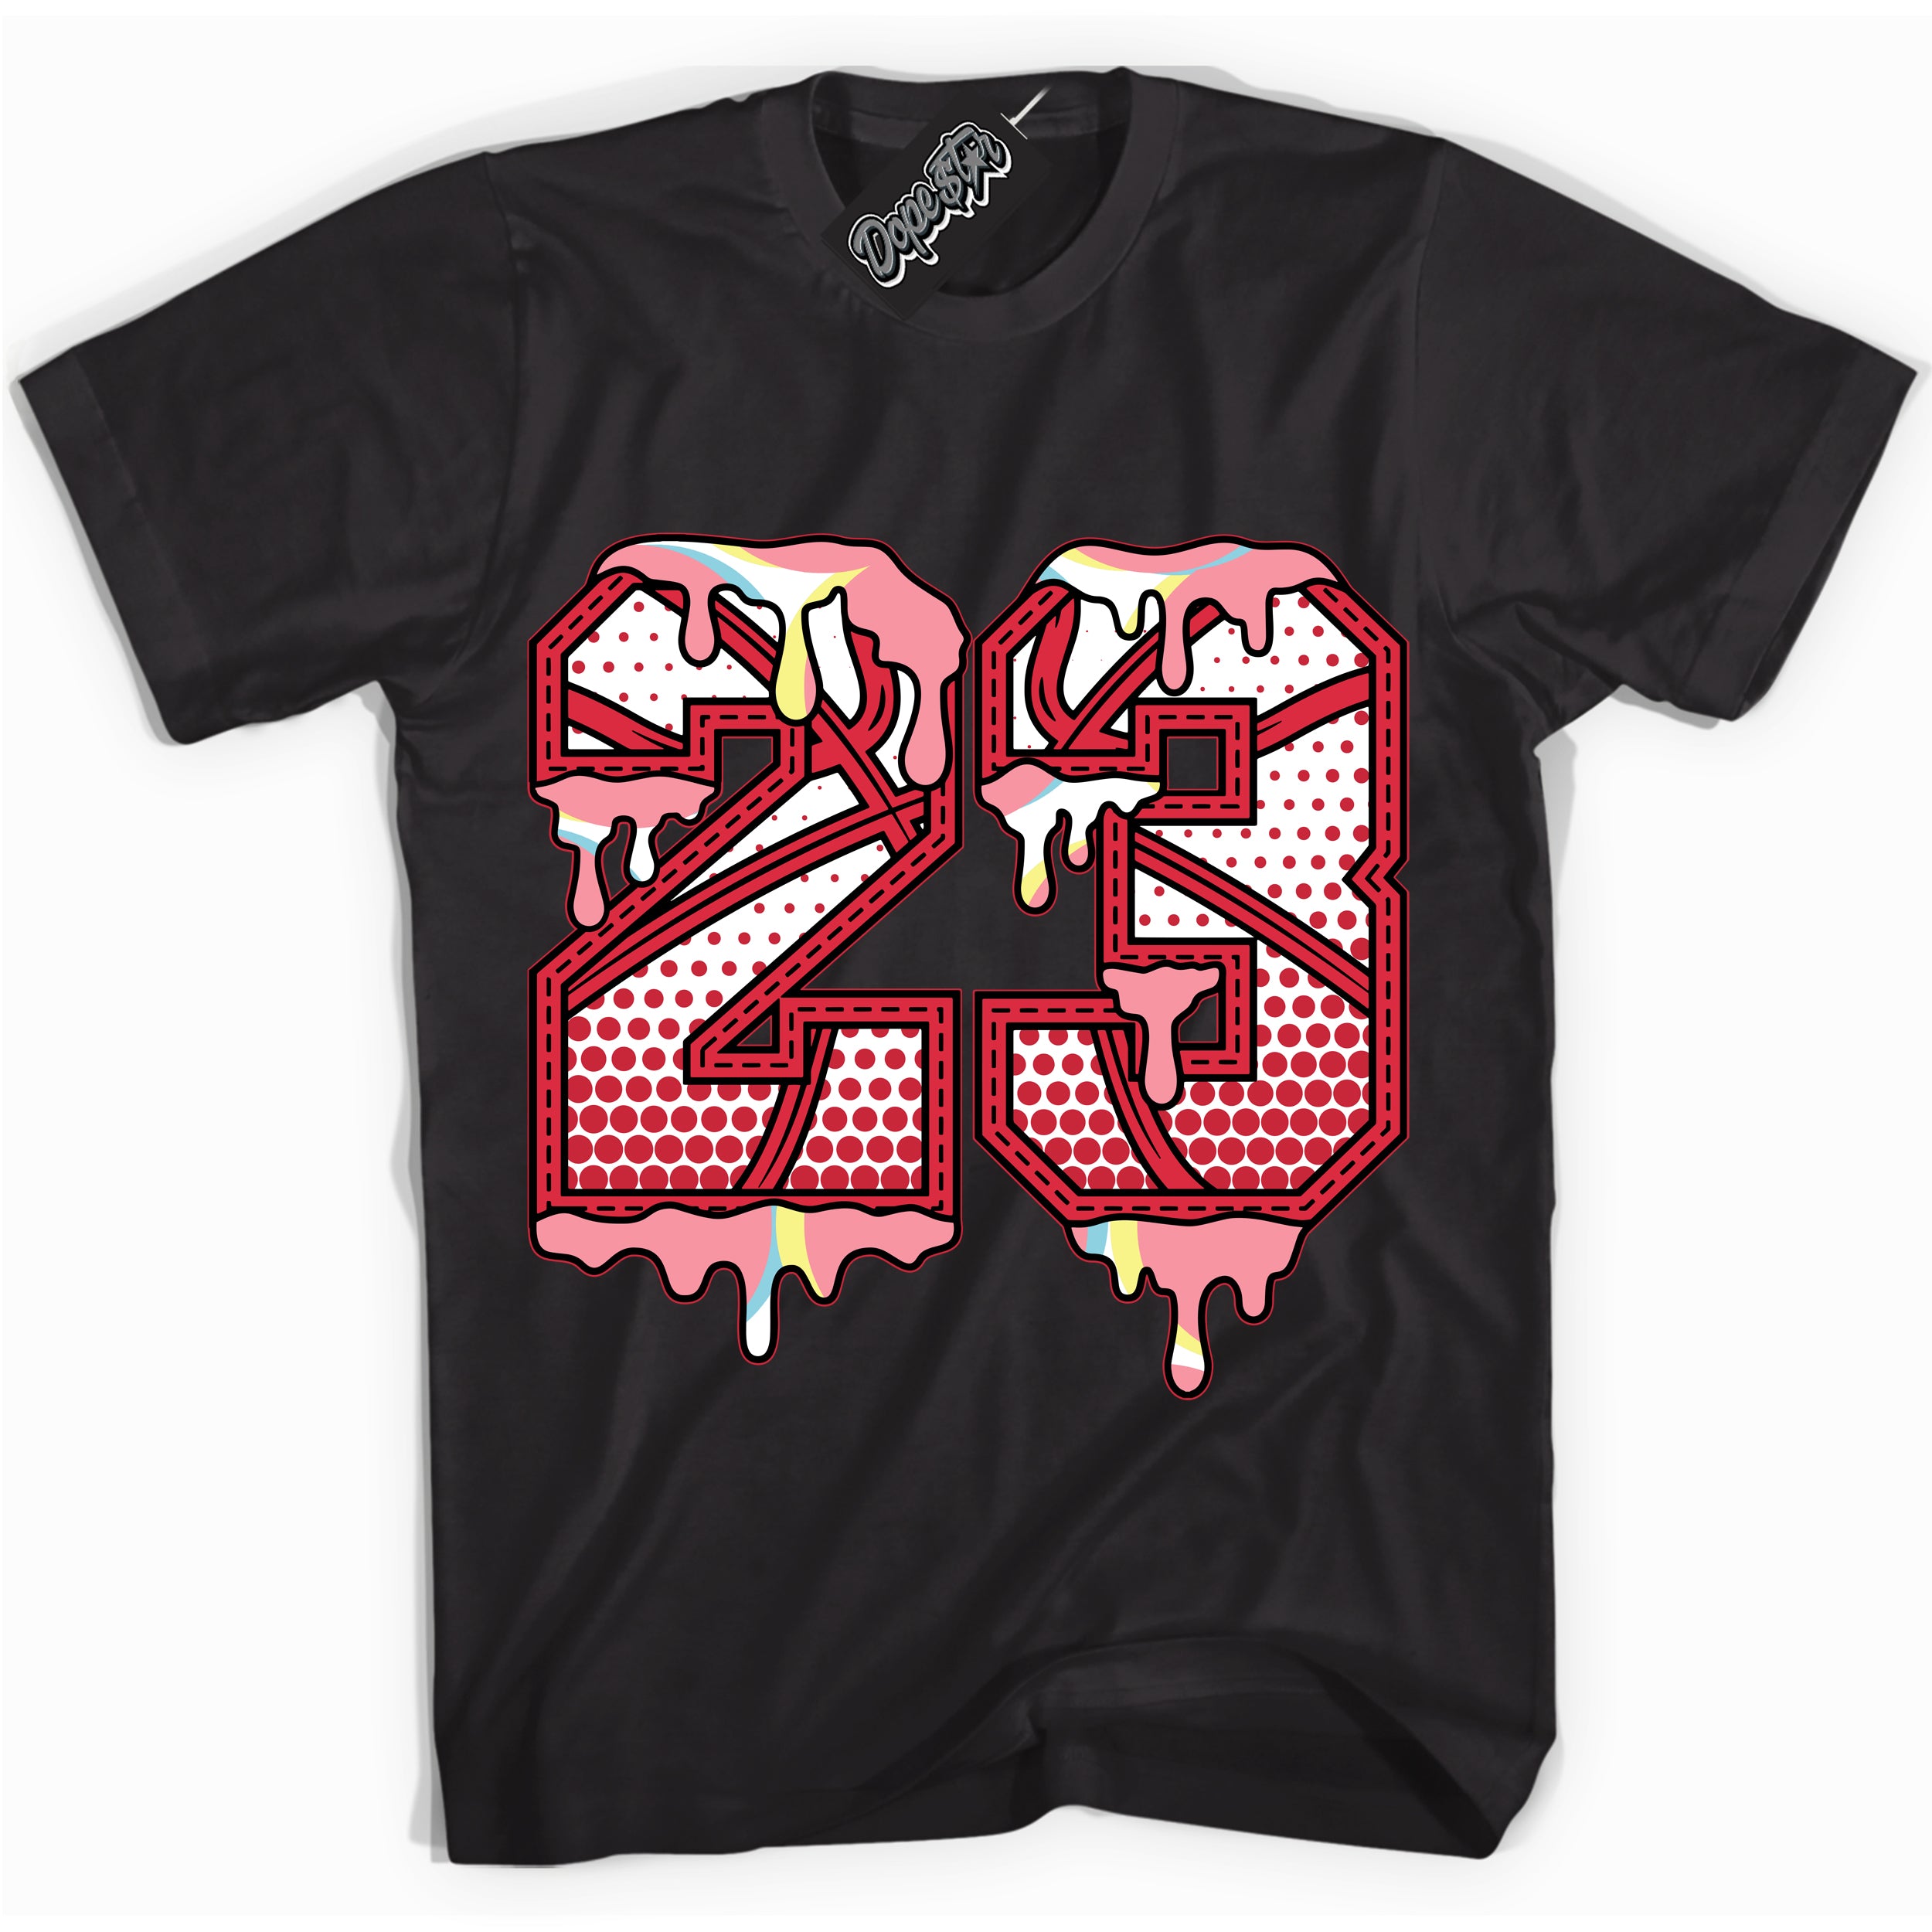 Cool Black graphic tee with “ 23 Ball ” design, that perfectly matches Spider-Verse 1s sneakers 